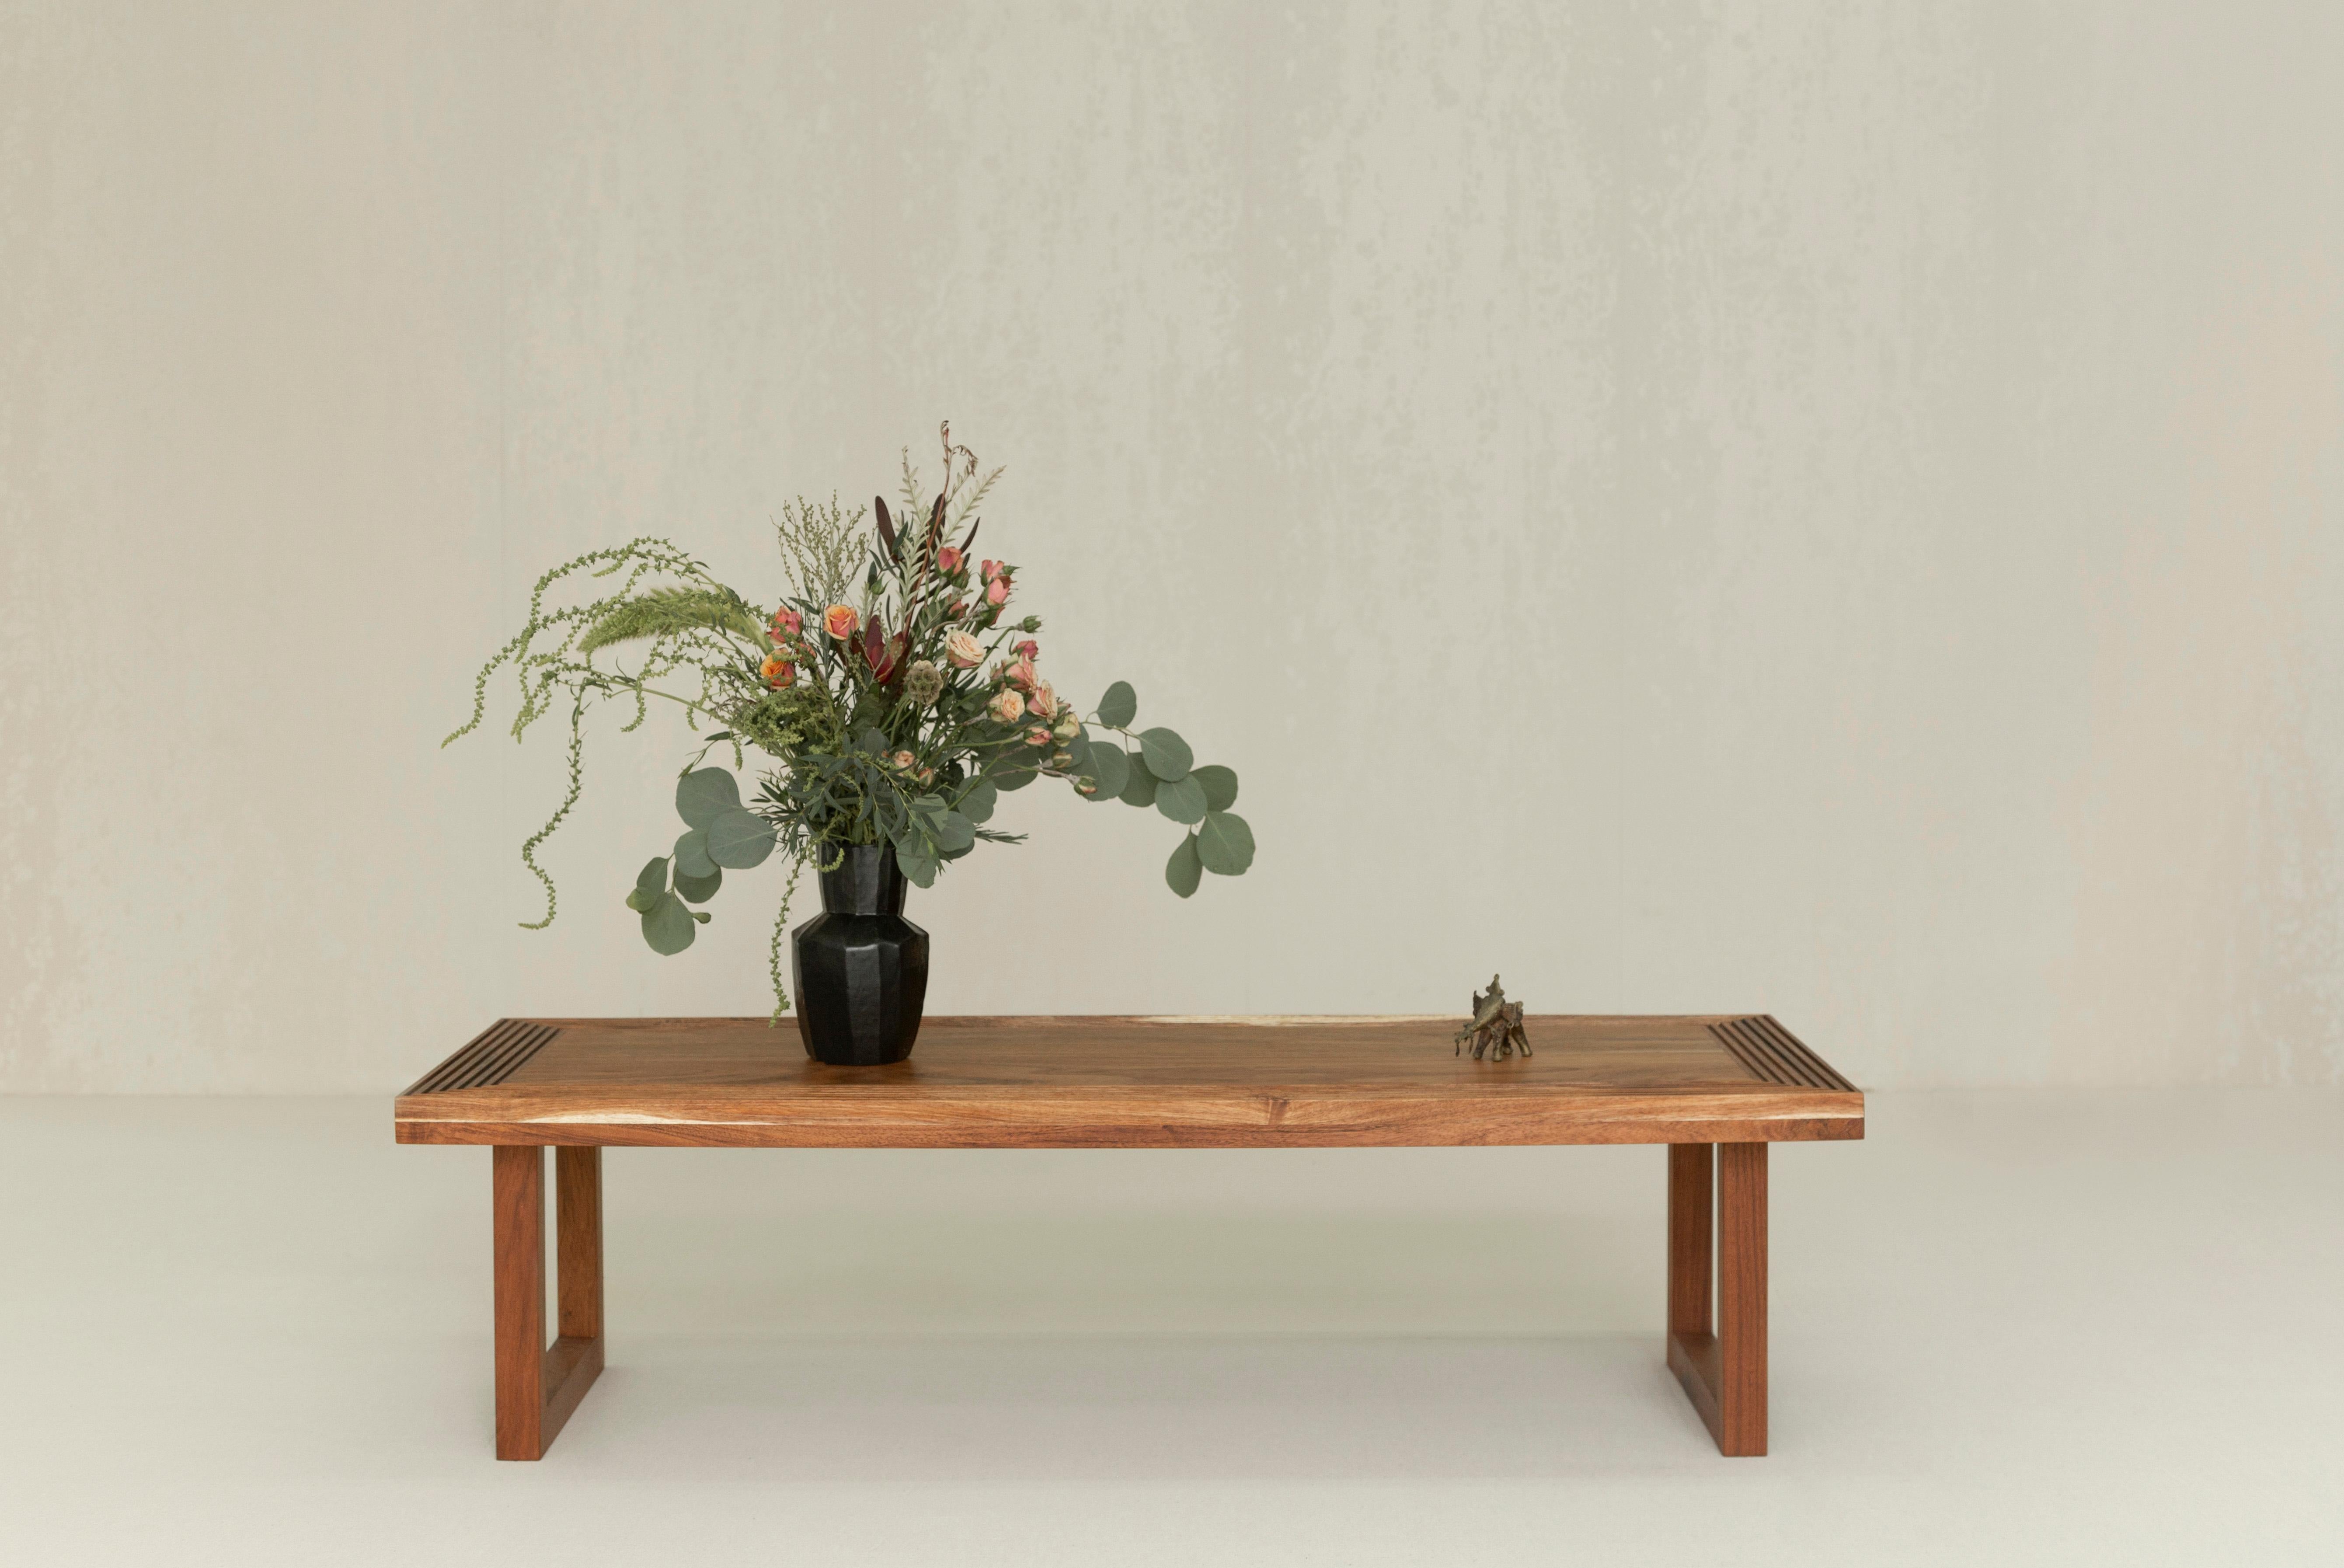 The Kenta coffee table is inspired by tea ceremonies, combining simplicity and great attention to detail. It is made out of a Mexican wood called Tzalam. It has exquisite detailing on the top with fine ridges.